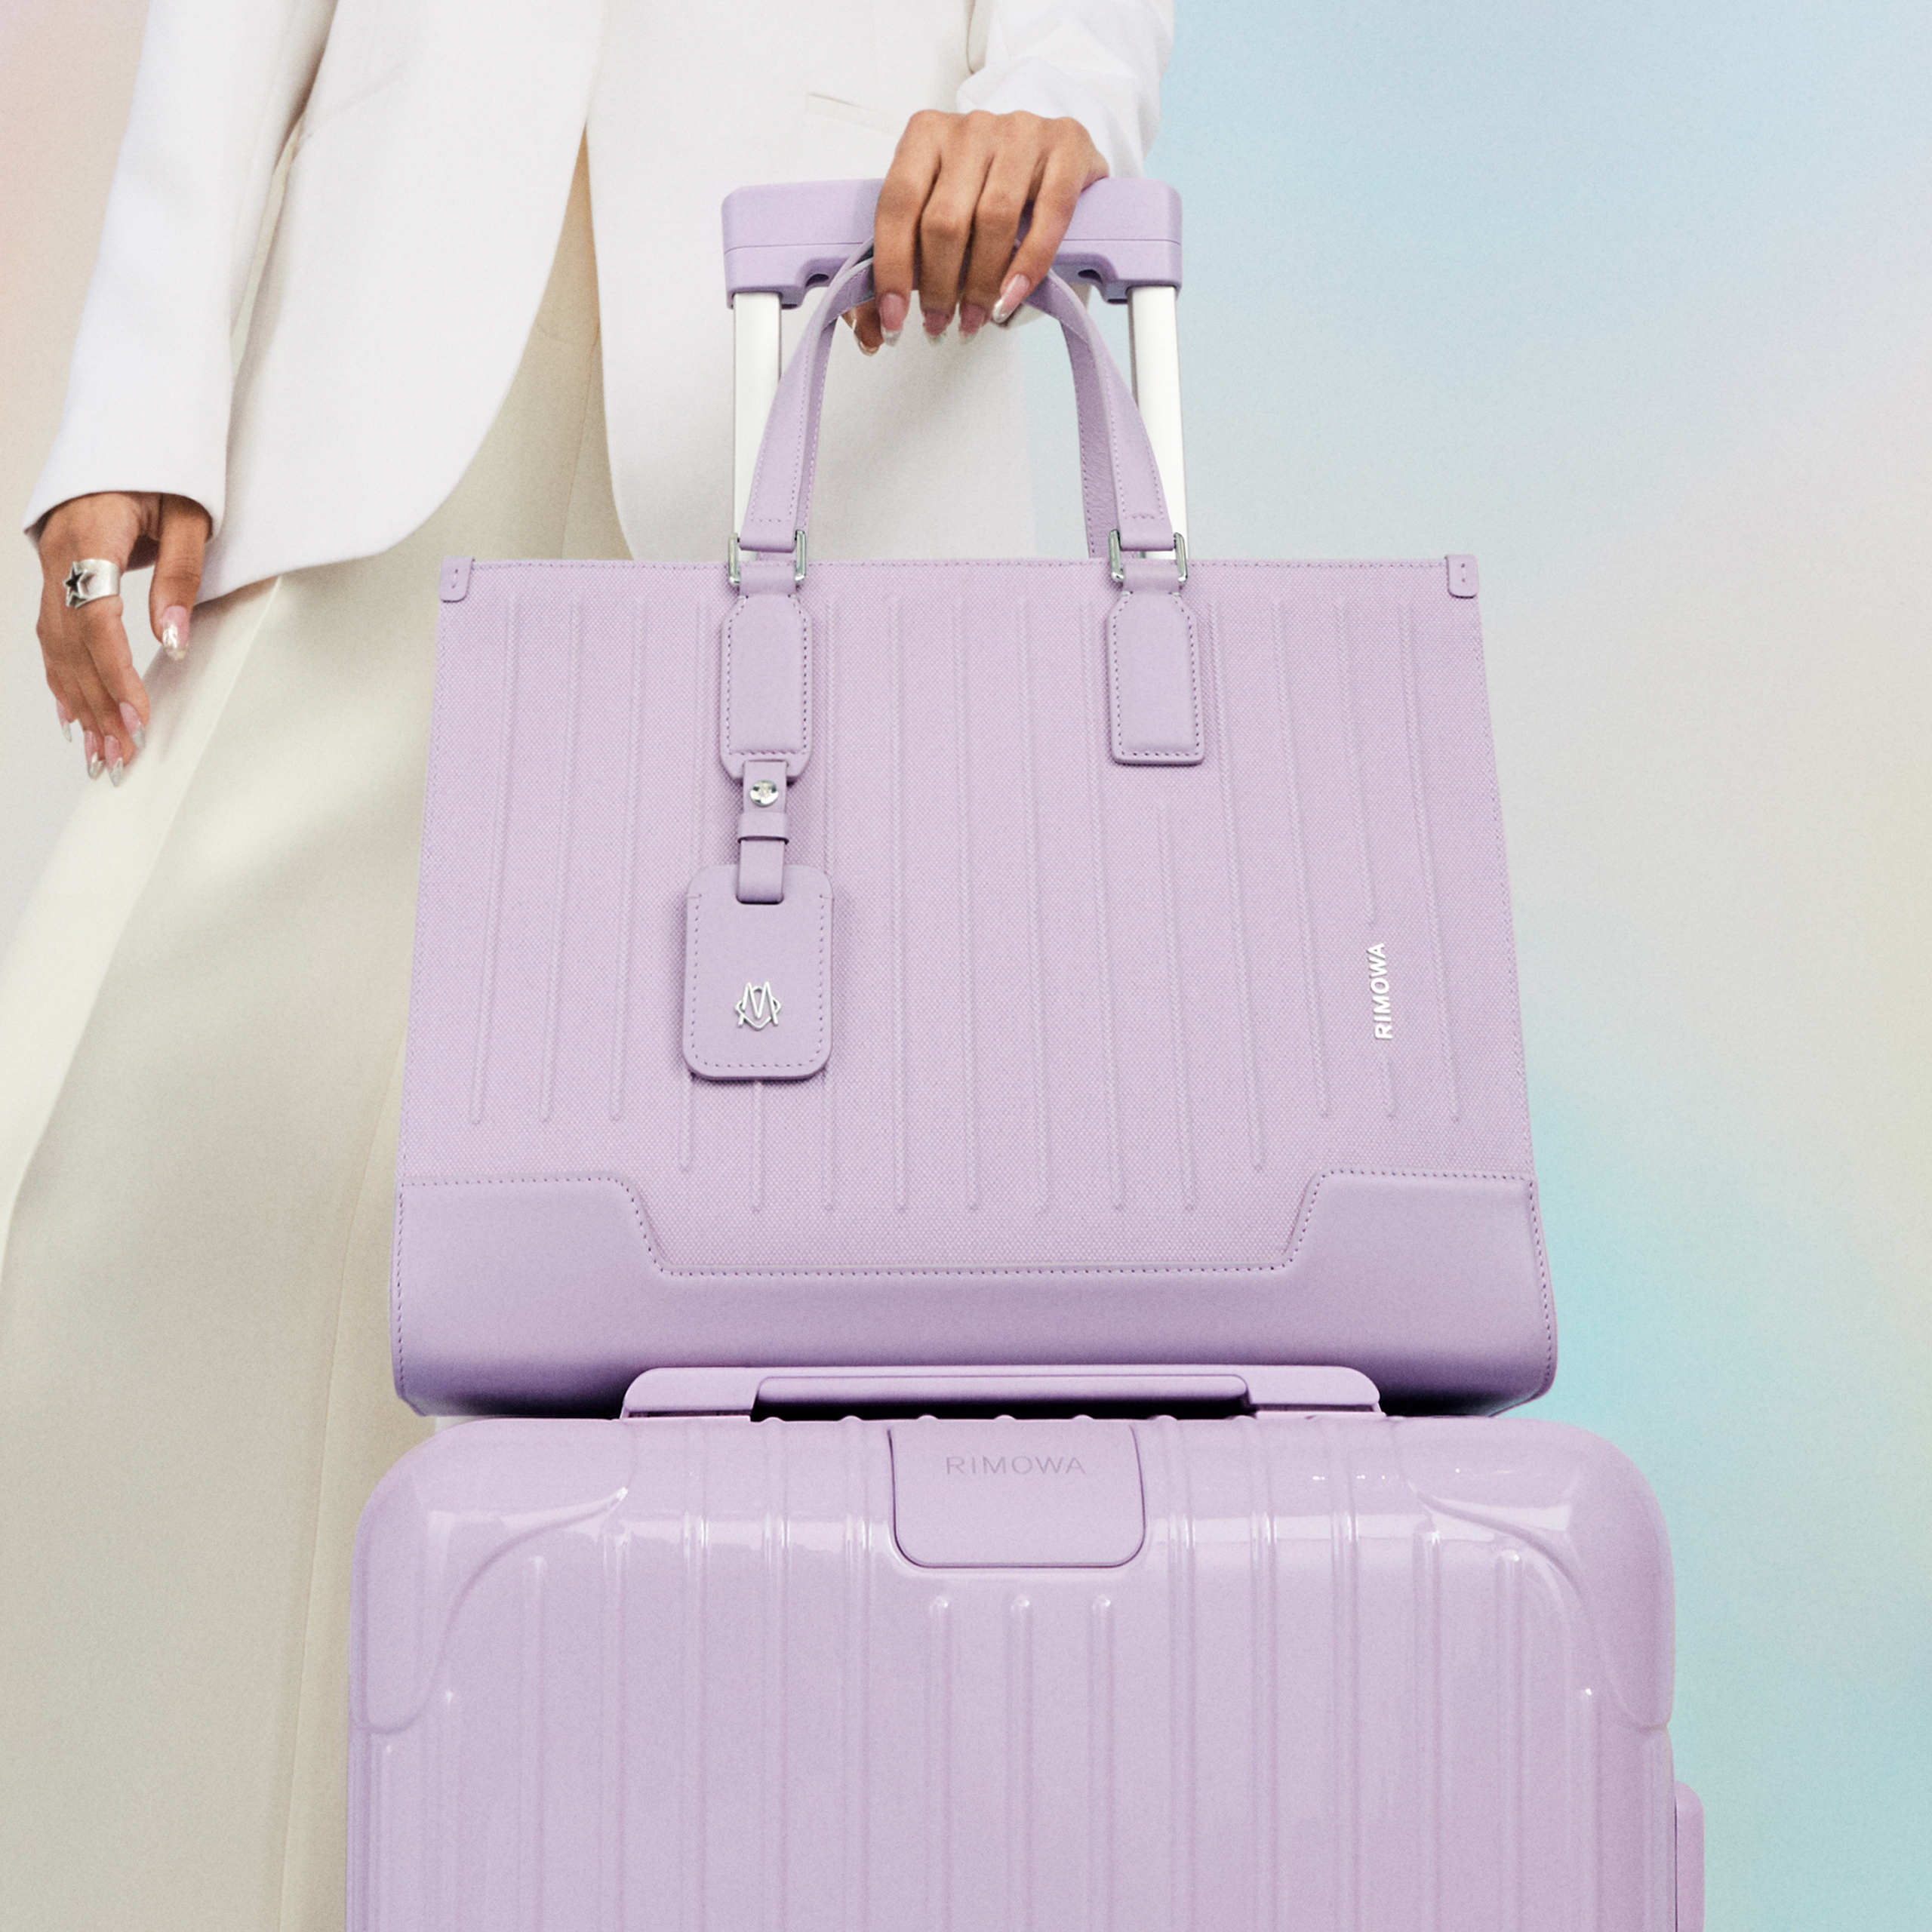 New Essential Colors Collection from Rimowa